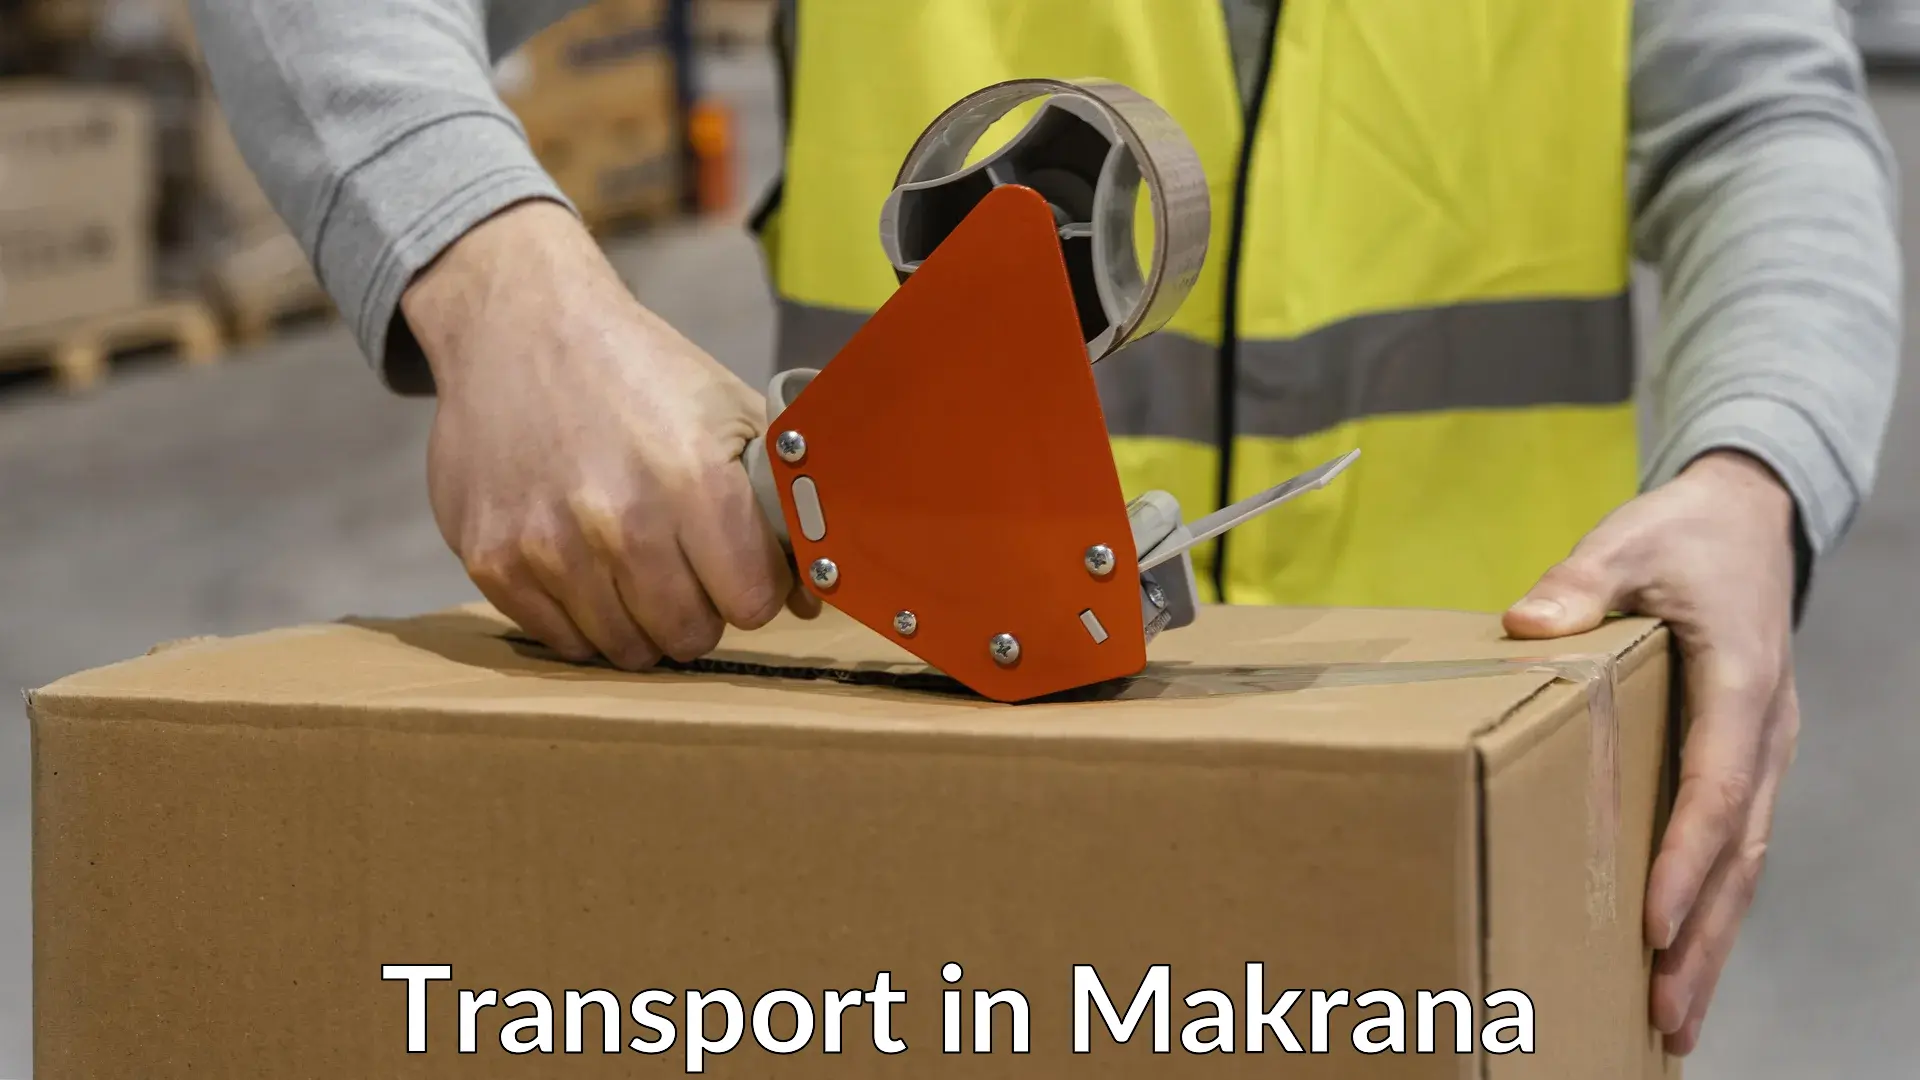 Container transport service in Makrana